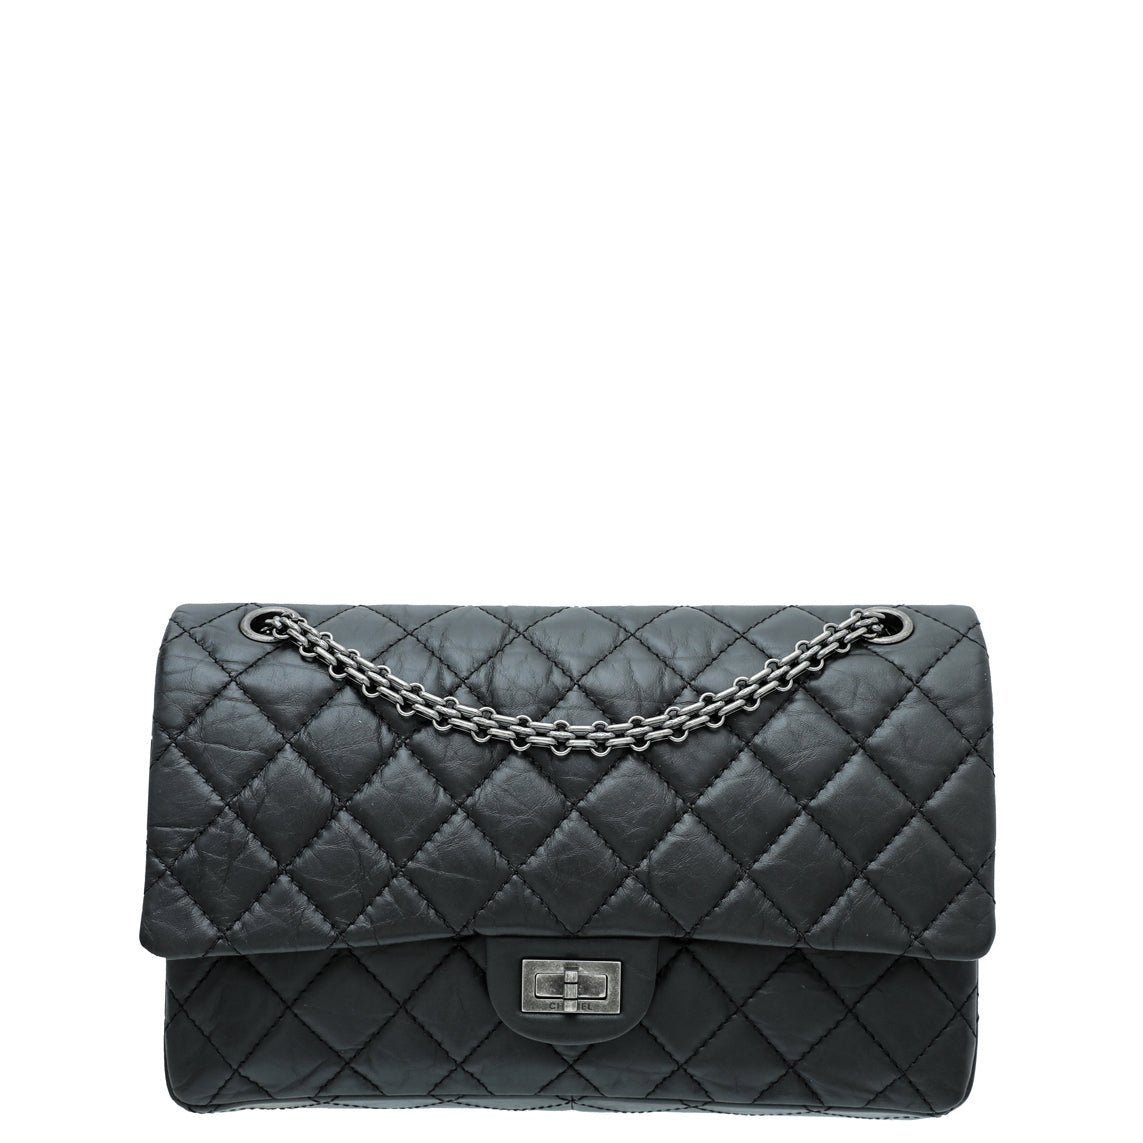 Chanel Black/Blue Quilted Tweed Reissue 2.55 Classic 226 Flap Bag